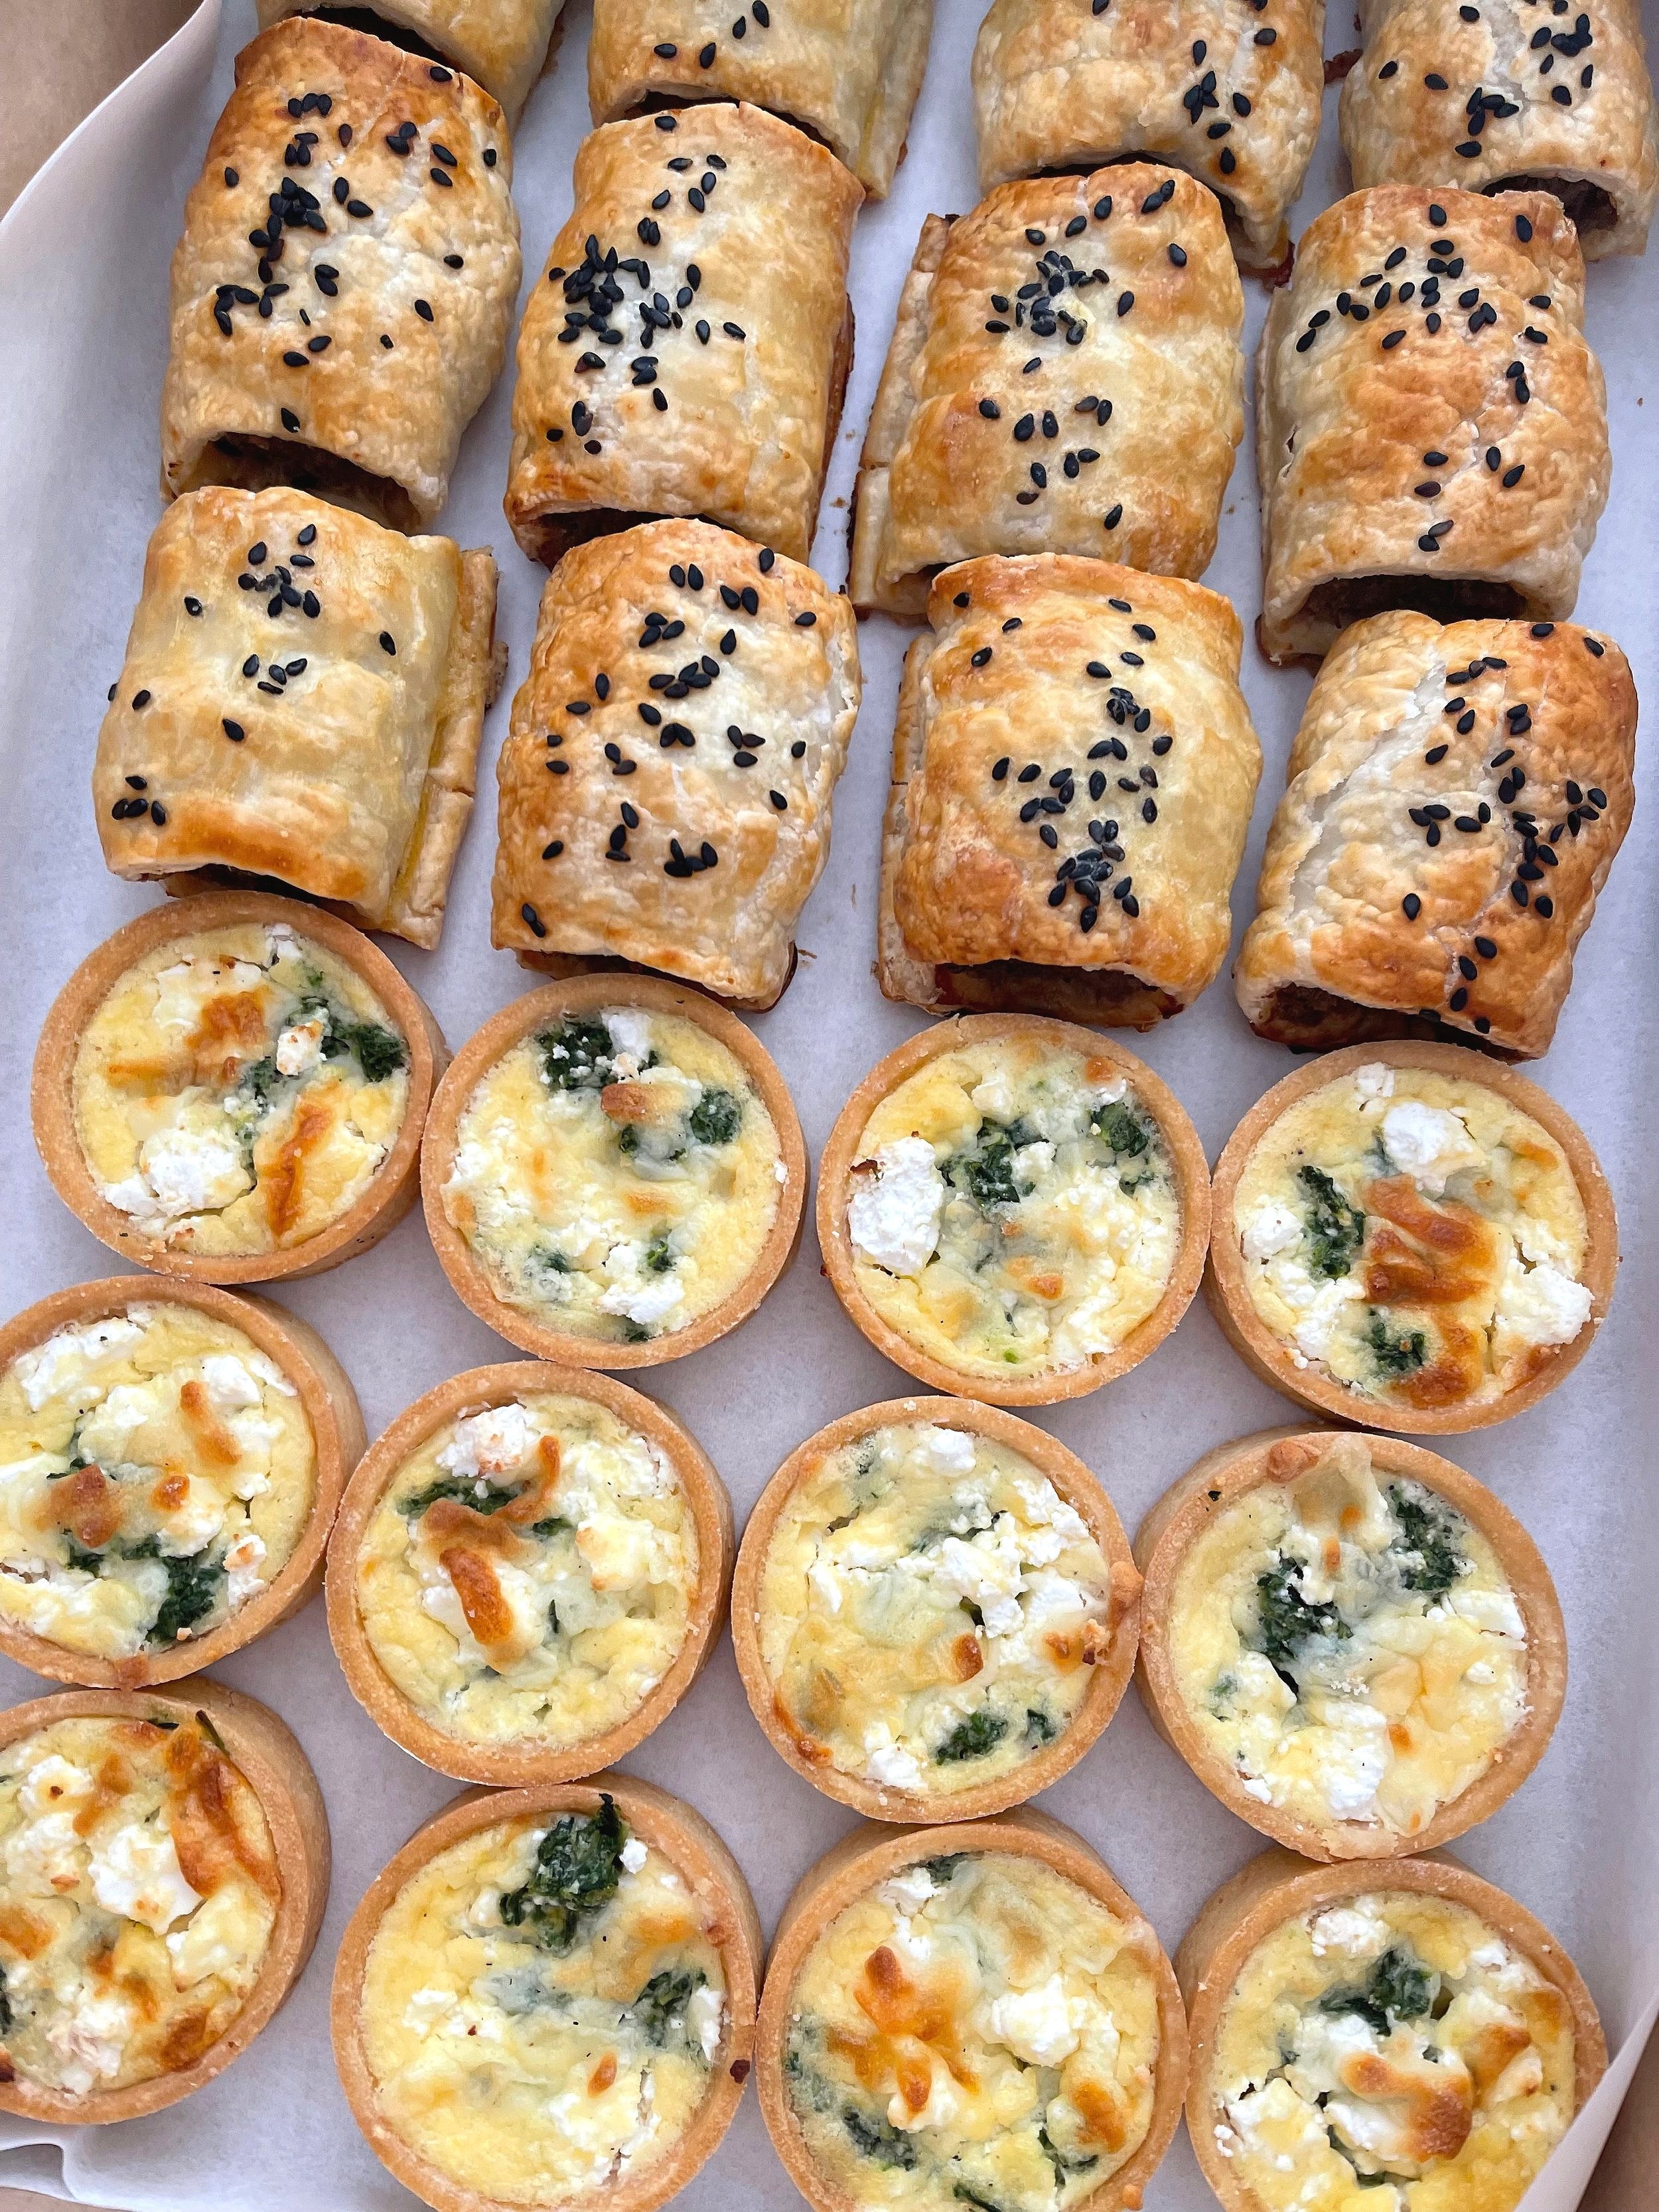 Cocktial Spinach &amp; Cheese Quiches/Sausage Rolls Made in House